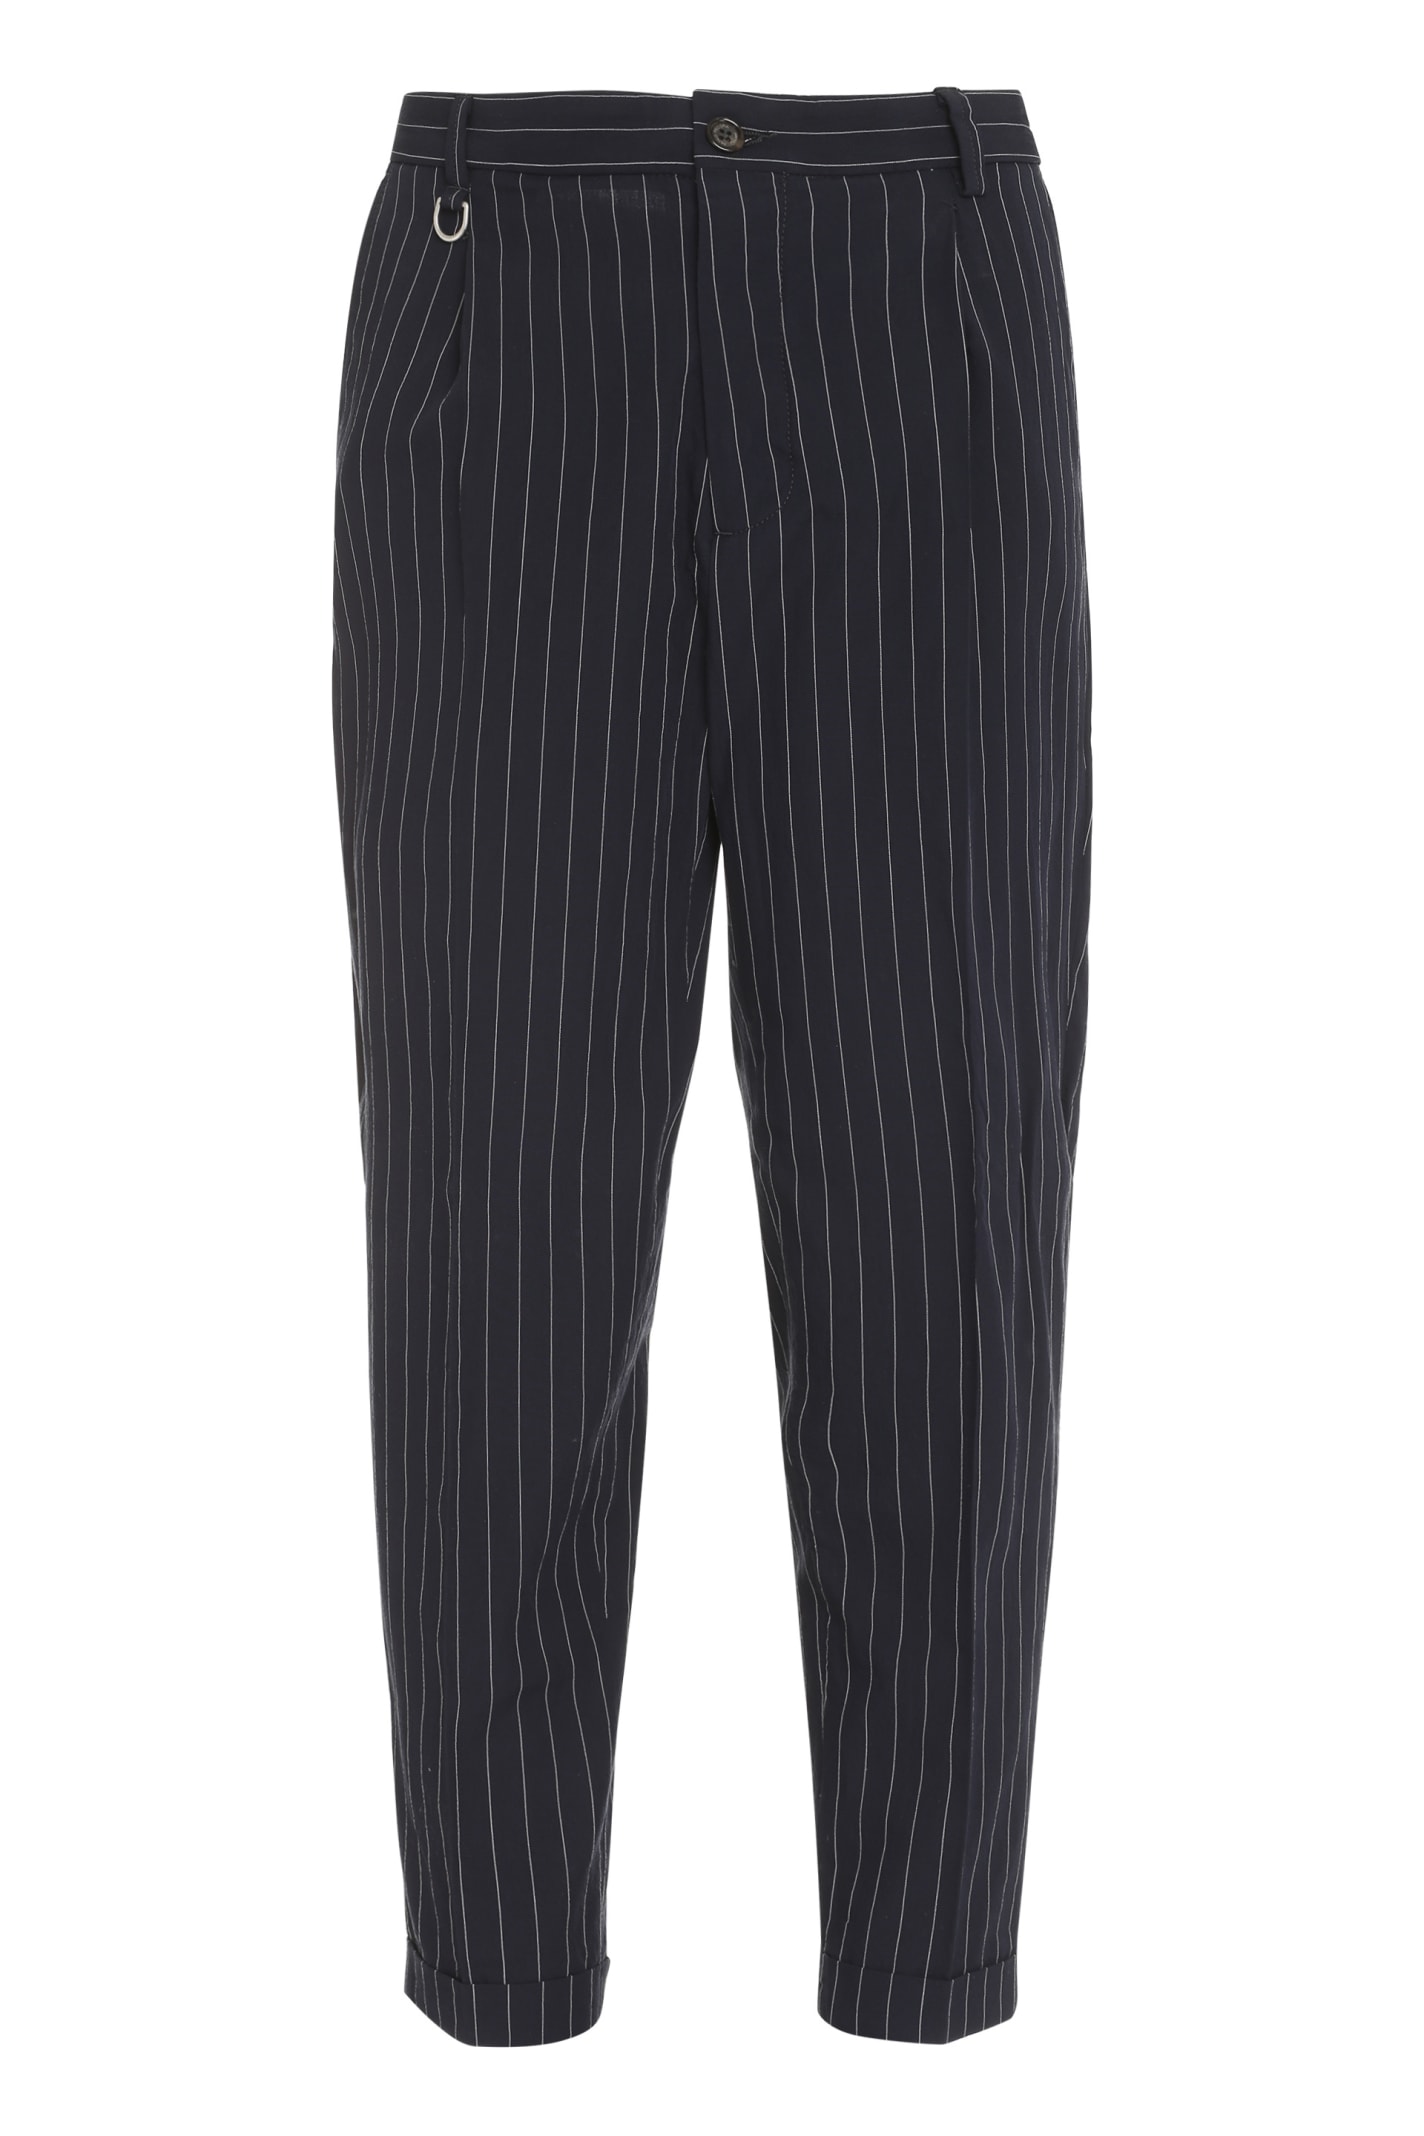 Paolo Pecora Tailored Trousers